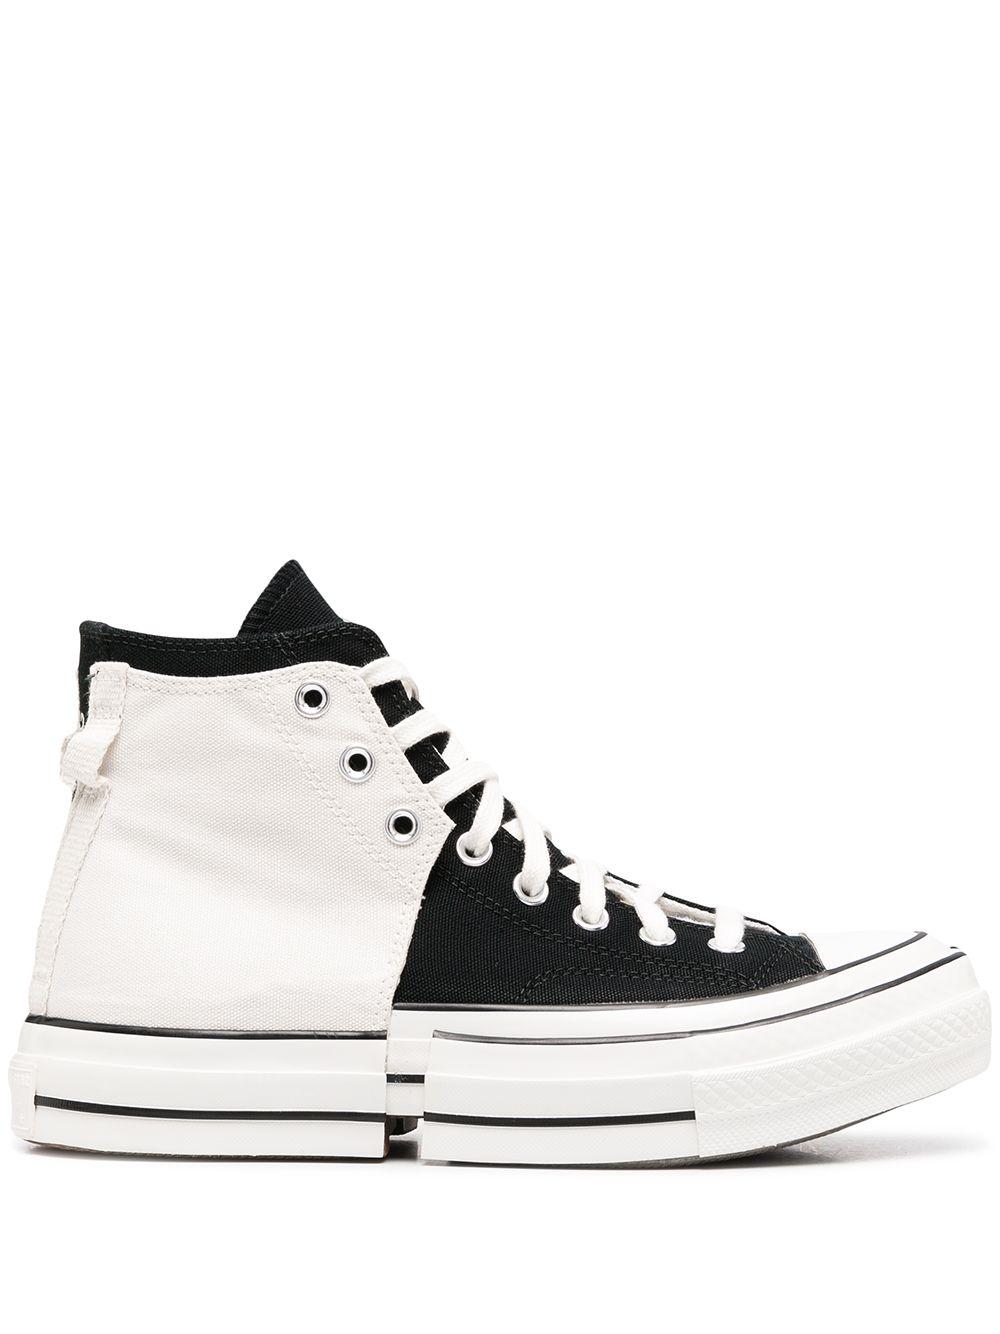 Converse X Feng Chen Wang High Top Trainers in Black - Lyst